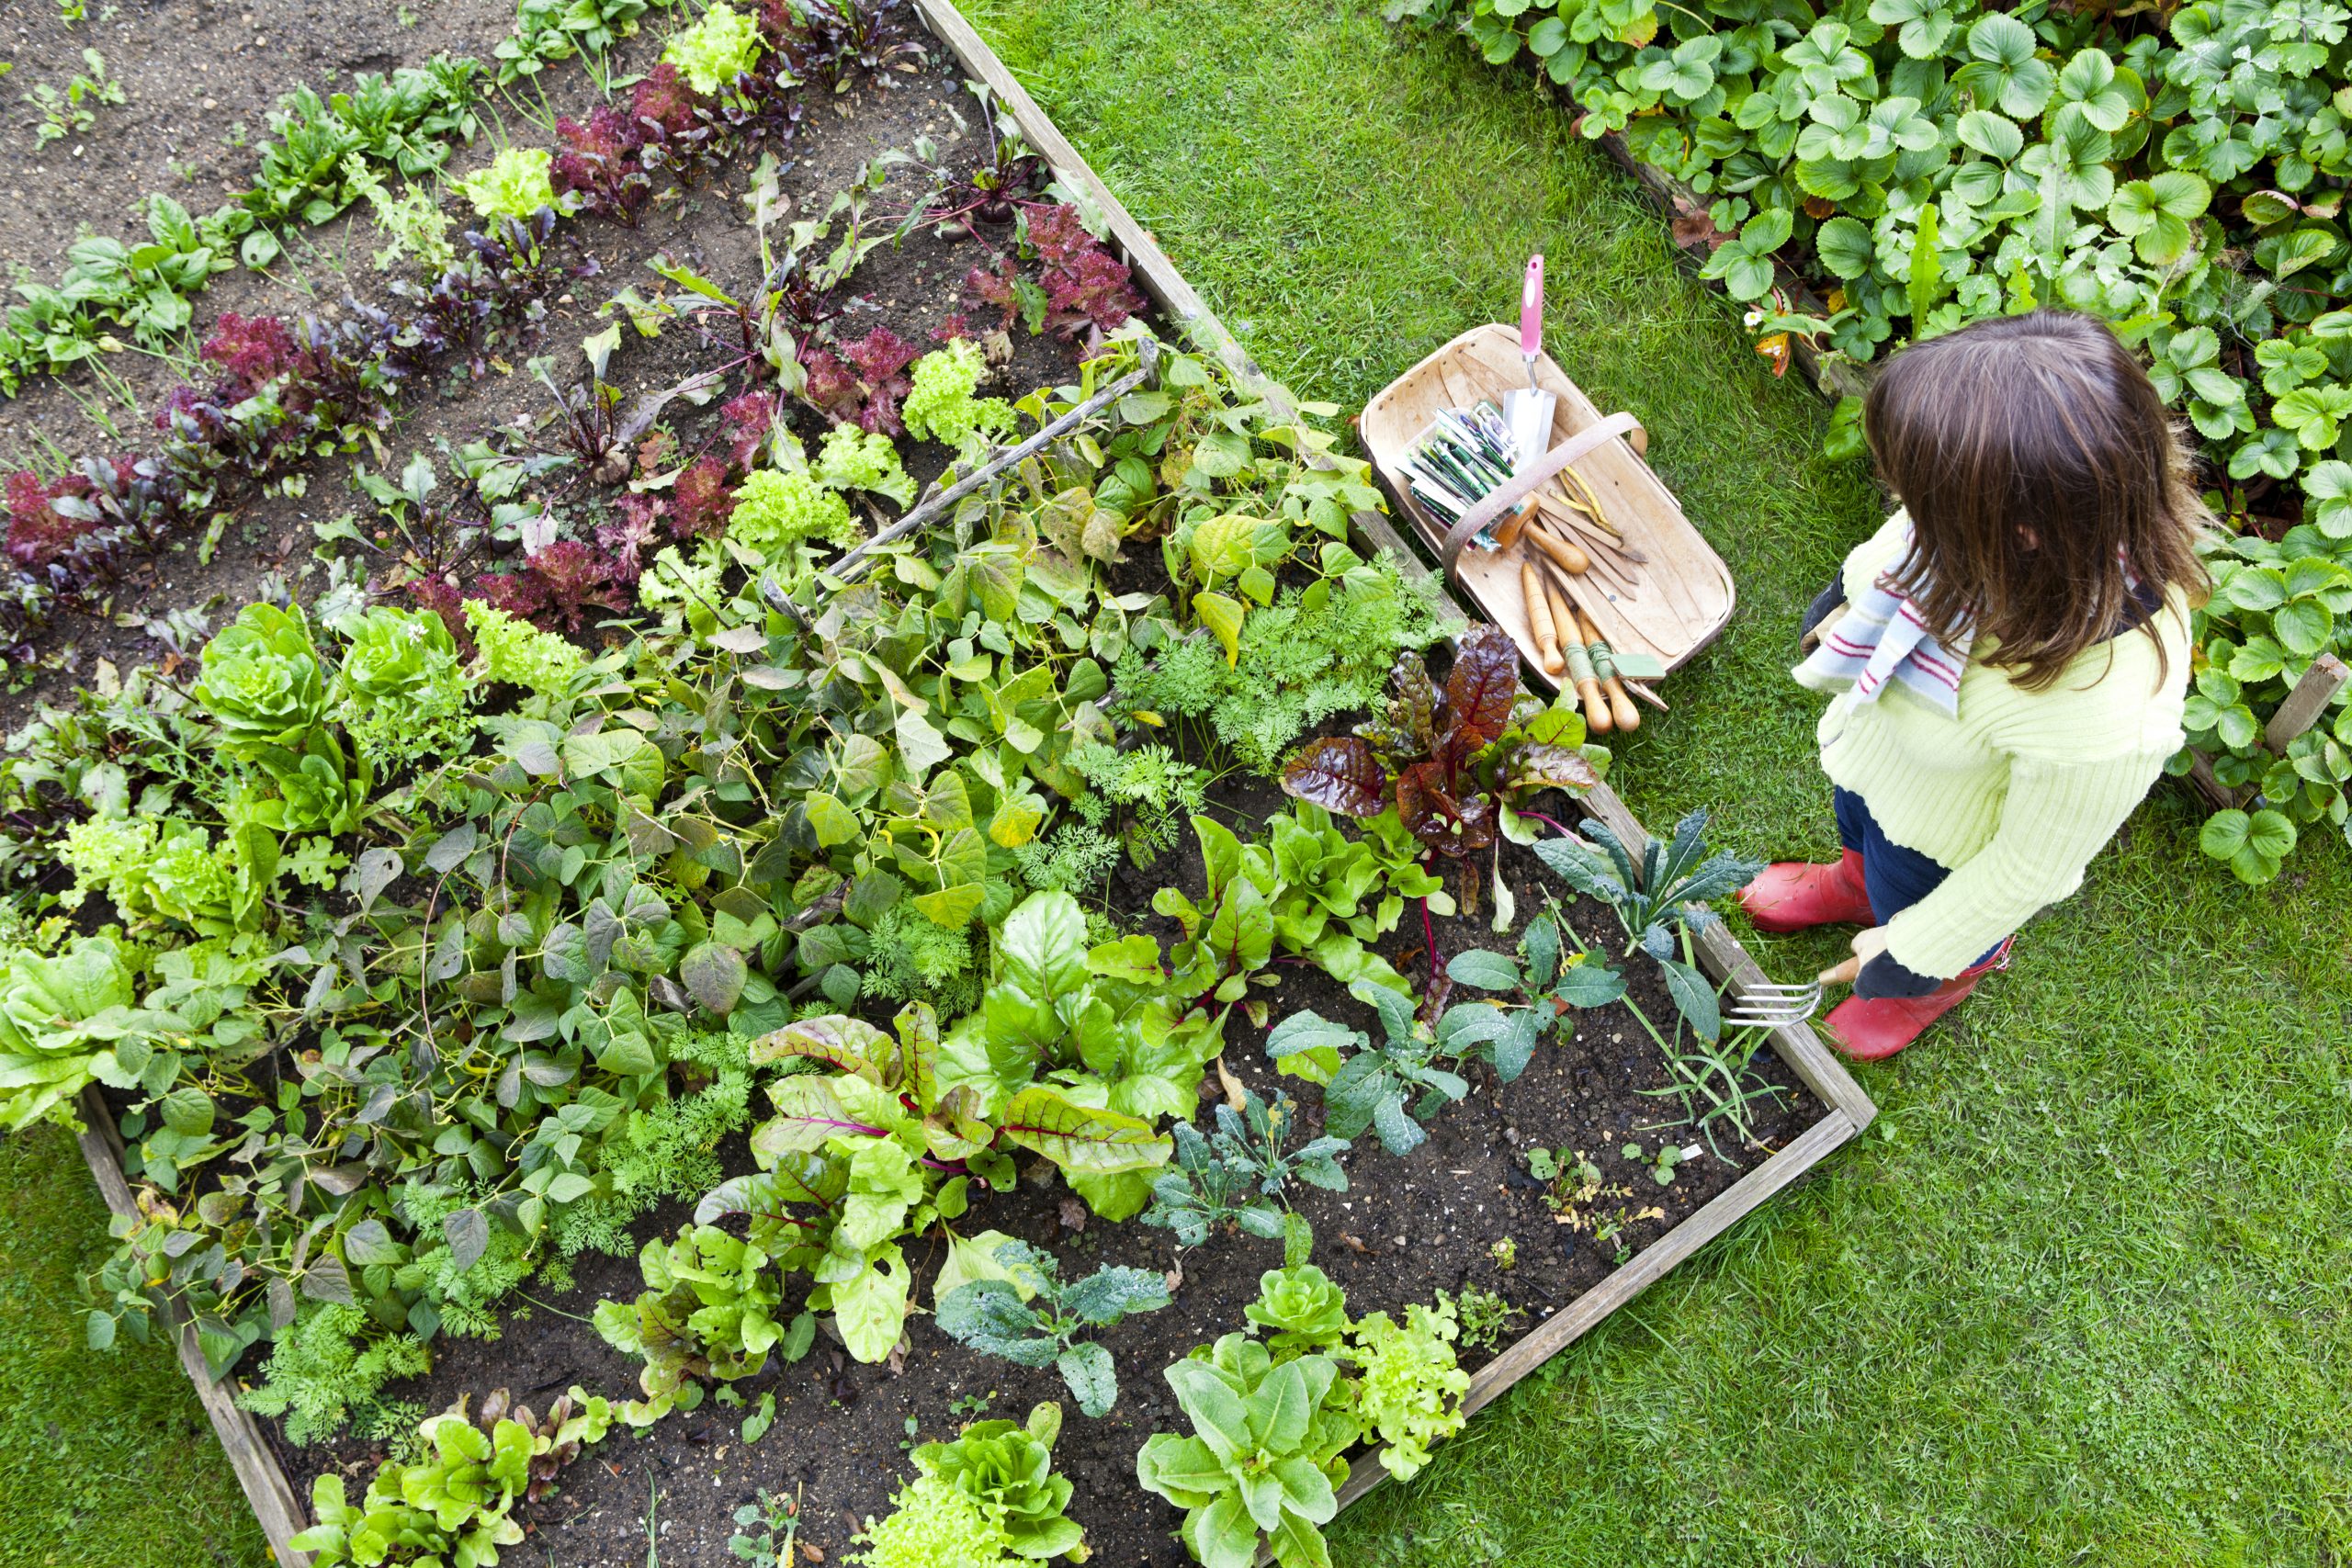 Woman looking down at an organic raised bed vegetable garden, holding weeding fork.